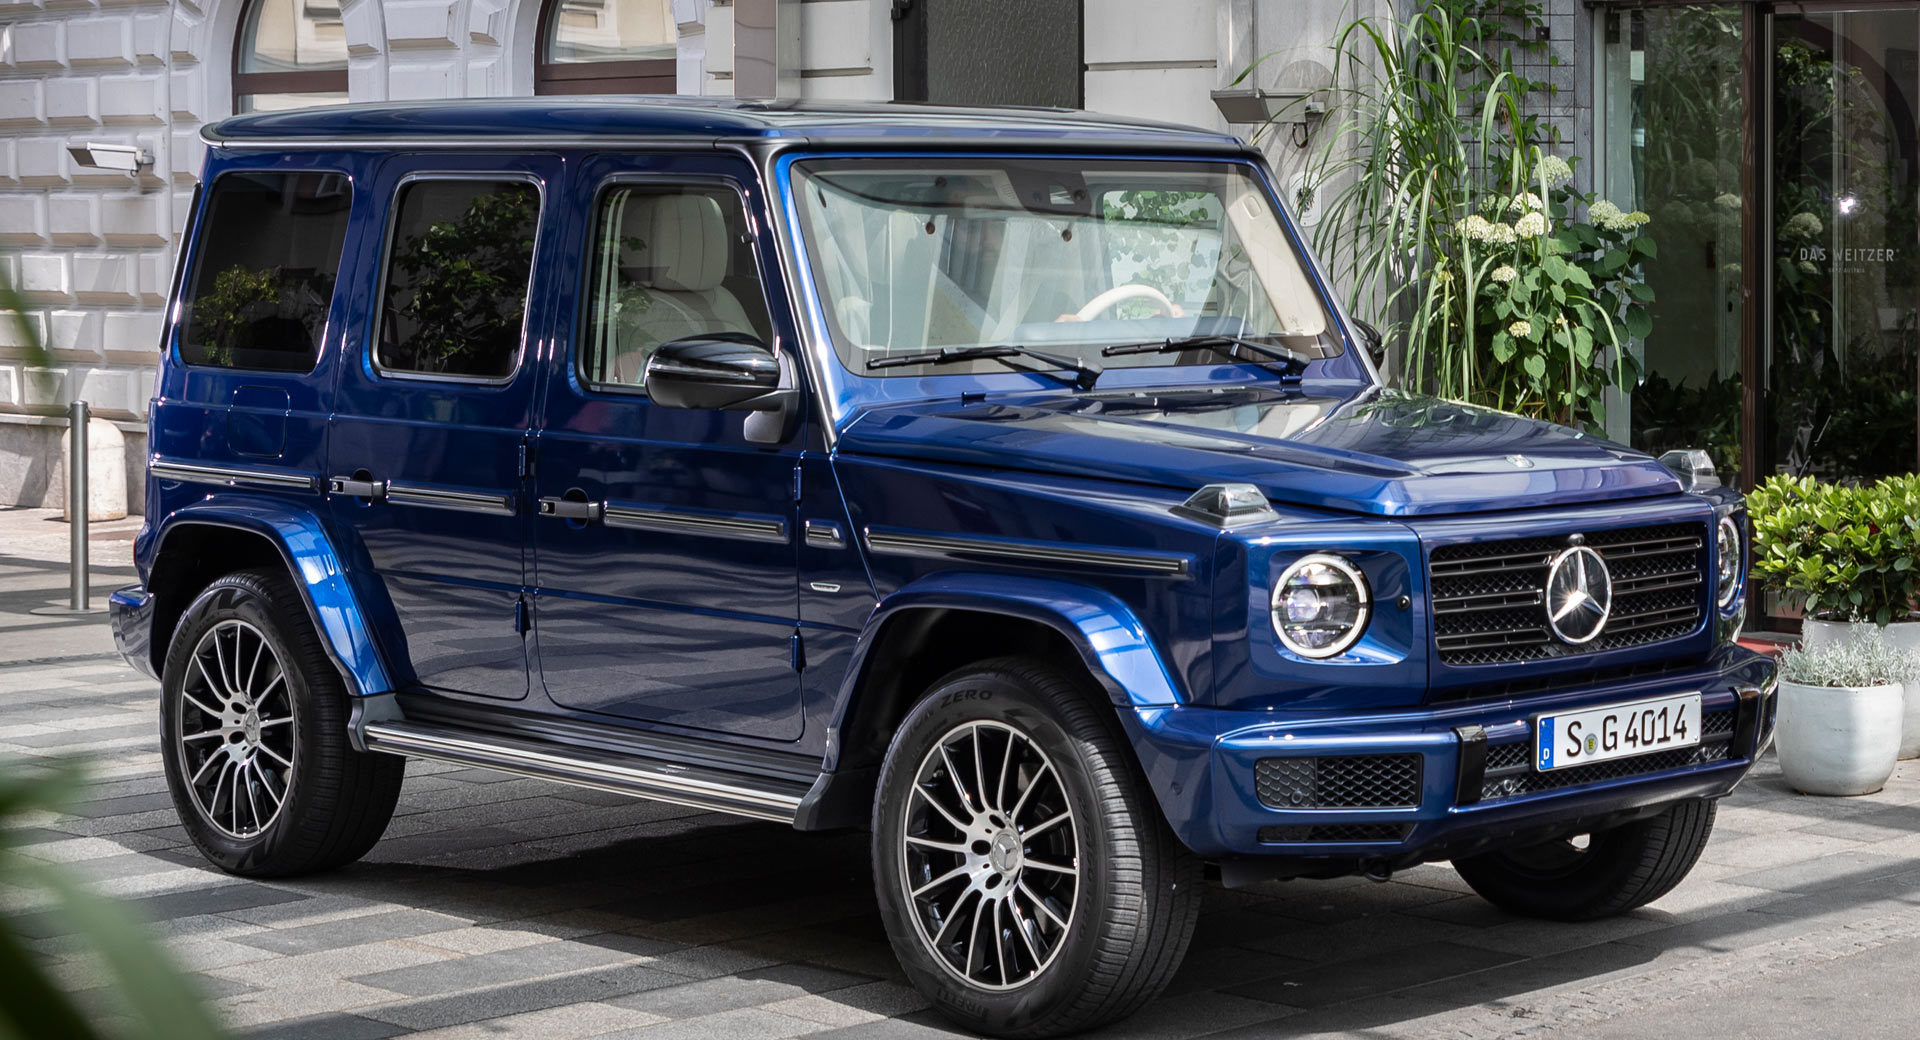 Mercedes G-Class “Stronger Than Time” Edition Celebrates Model's